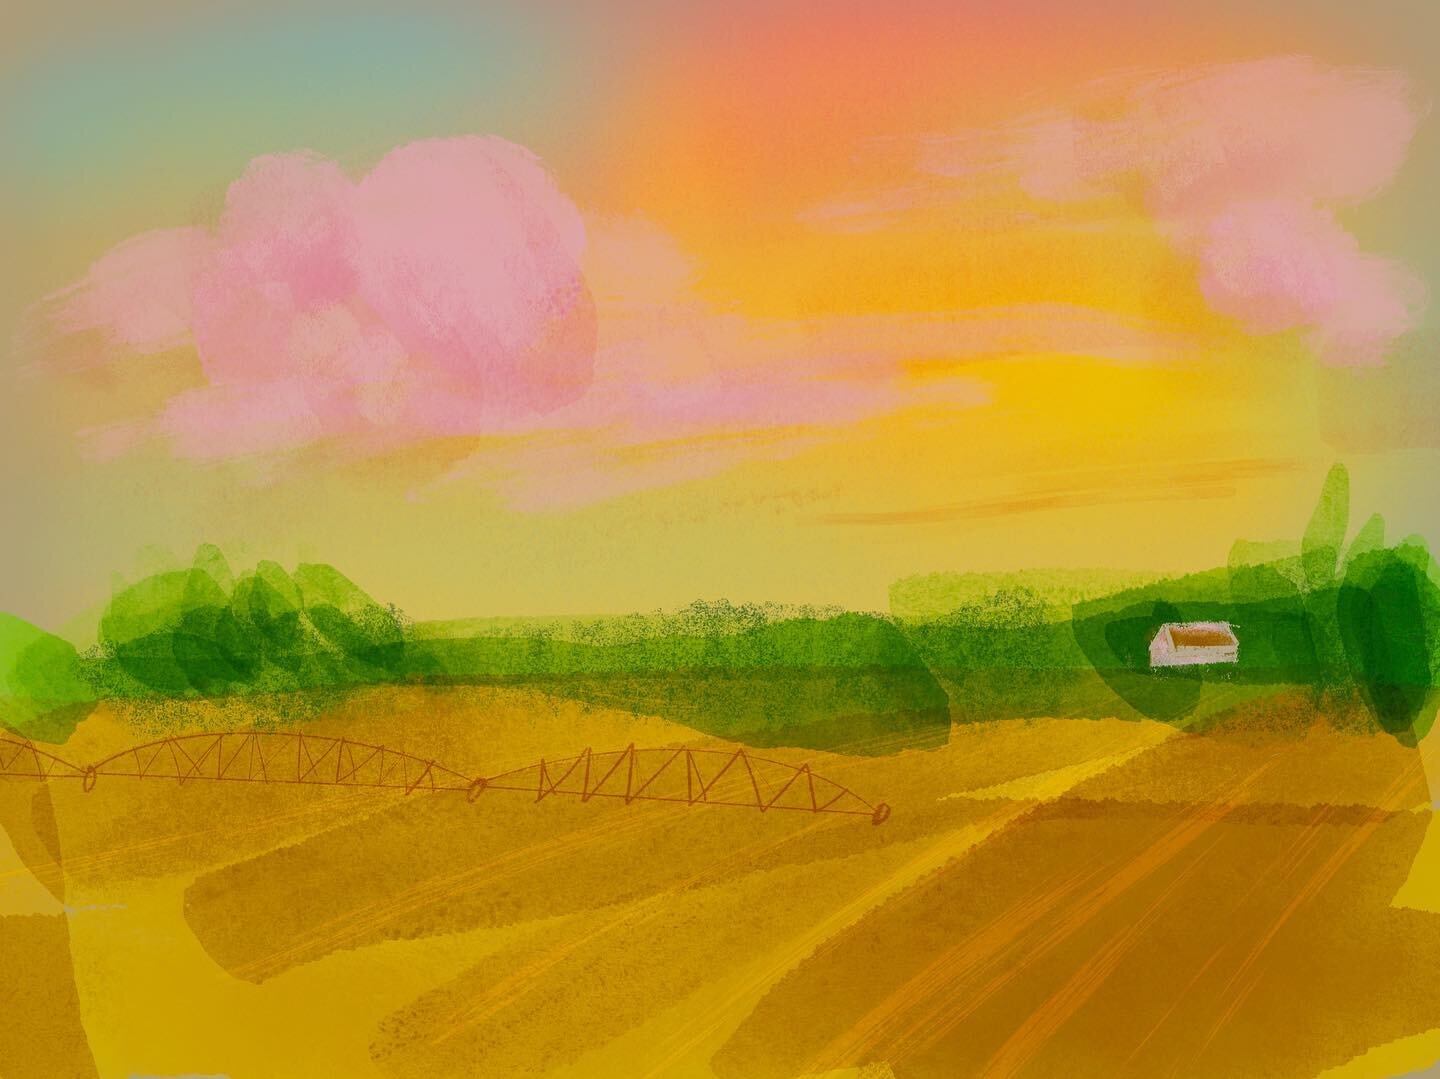 Staying inspired, just forgetting to share. Found a new brush set I&rsquo;m in love with in Procreate so crafting some landscapes, more to come. 🌾